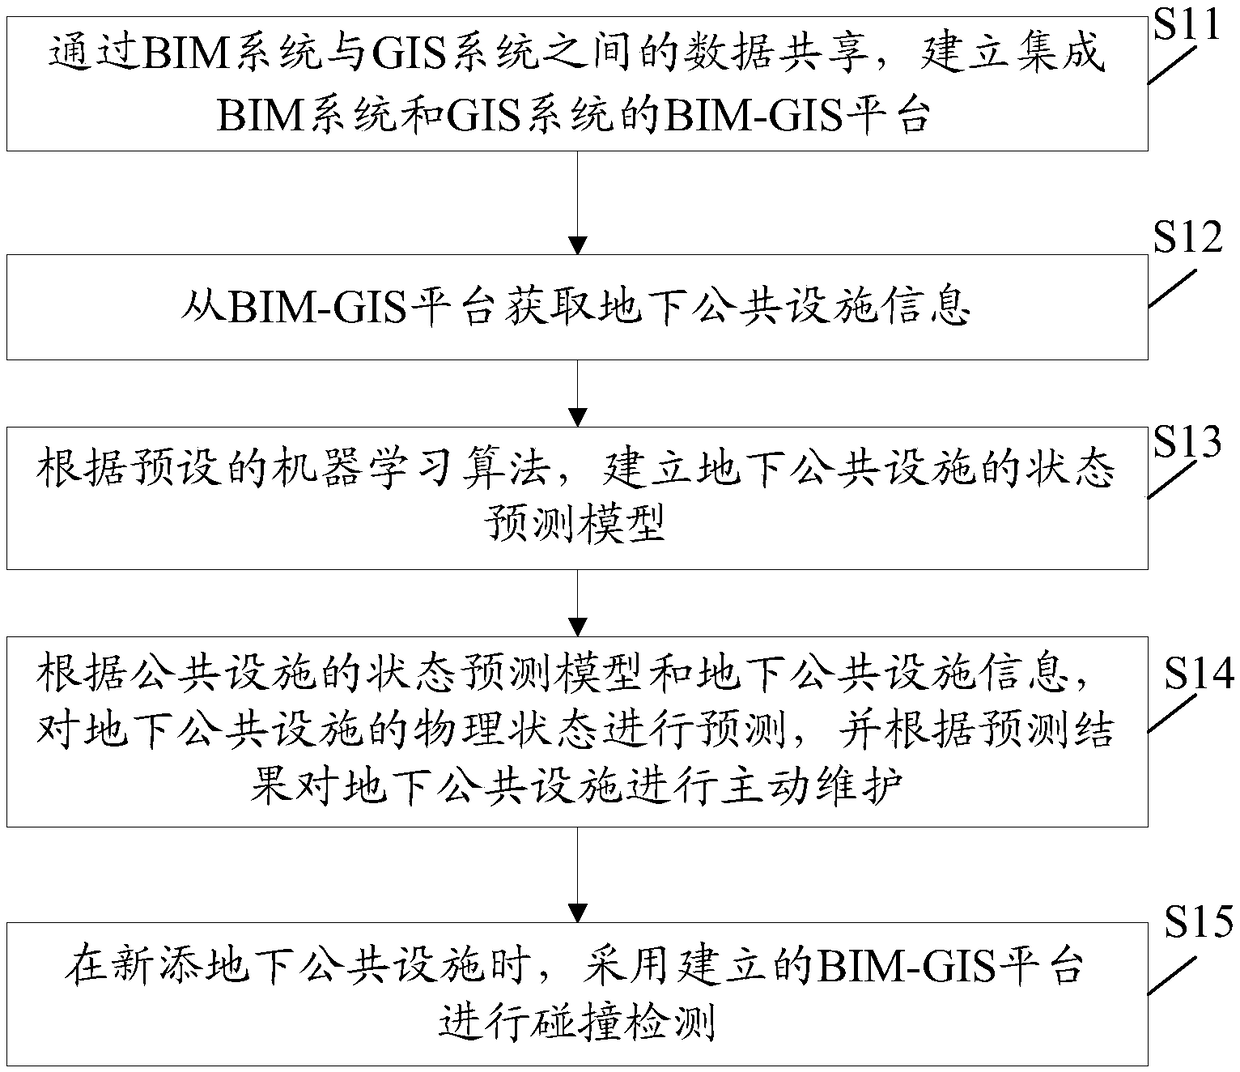 Method and device for managing underground public facilities based on BIM (Building Information Modeling) and GIS (Geographic Information System)